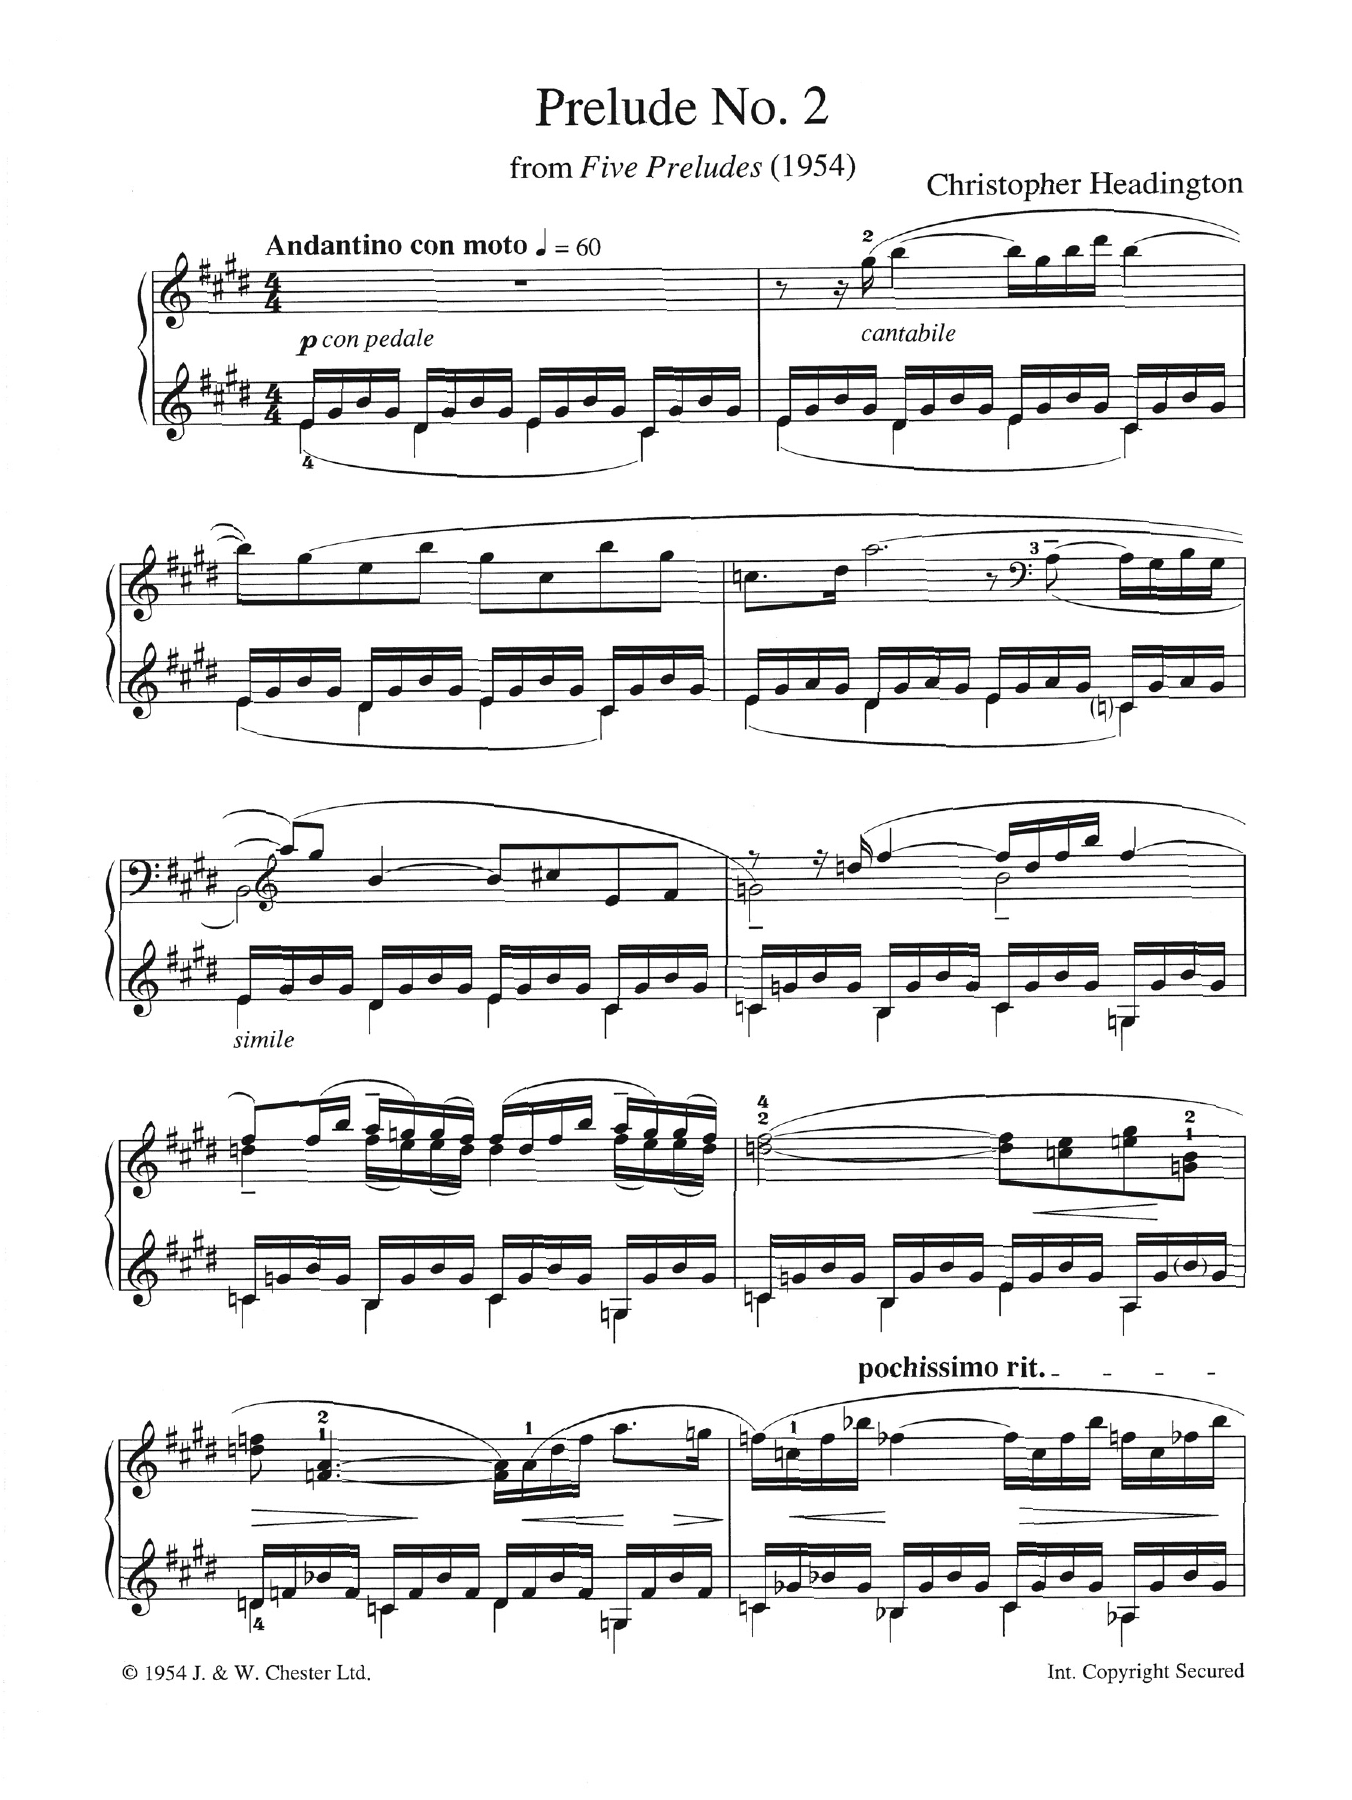 Download Christopher Headington Prelude No. 2 (from 